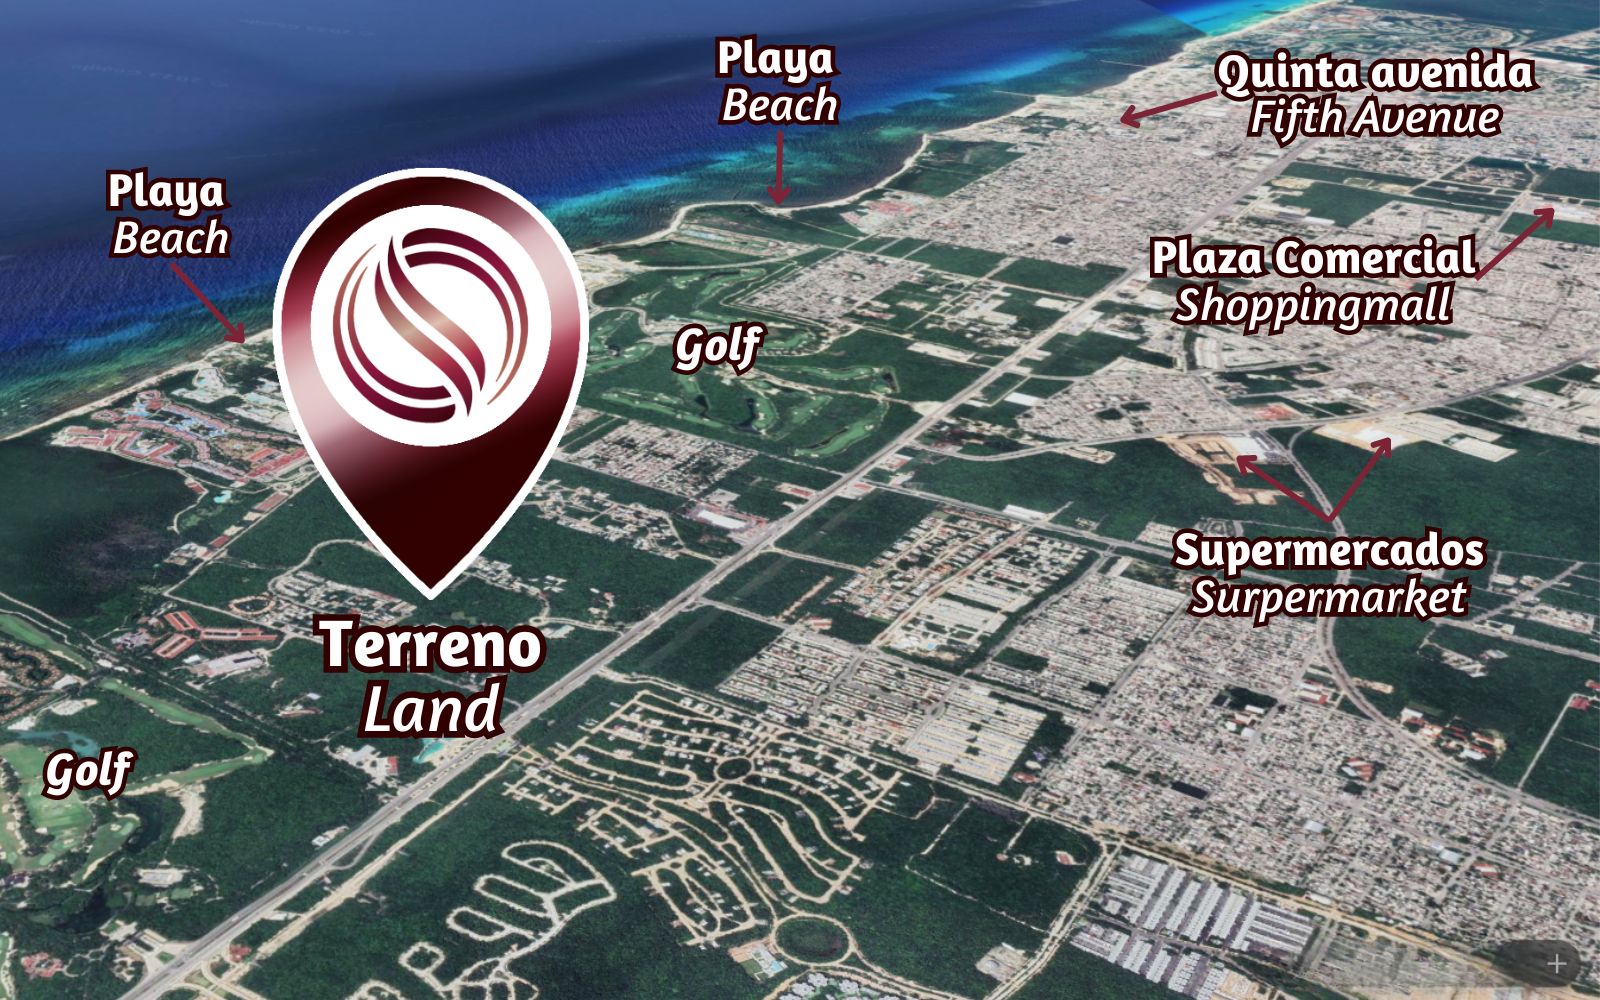 Land Gated community , beach access, clubhouse with amenities, bike path to the beach courts, lot for sale Tulum